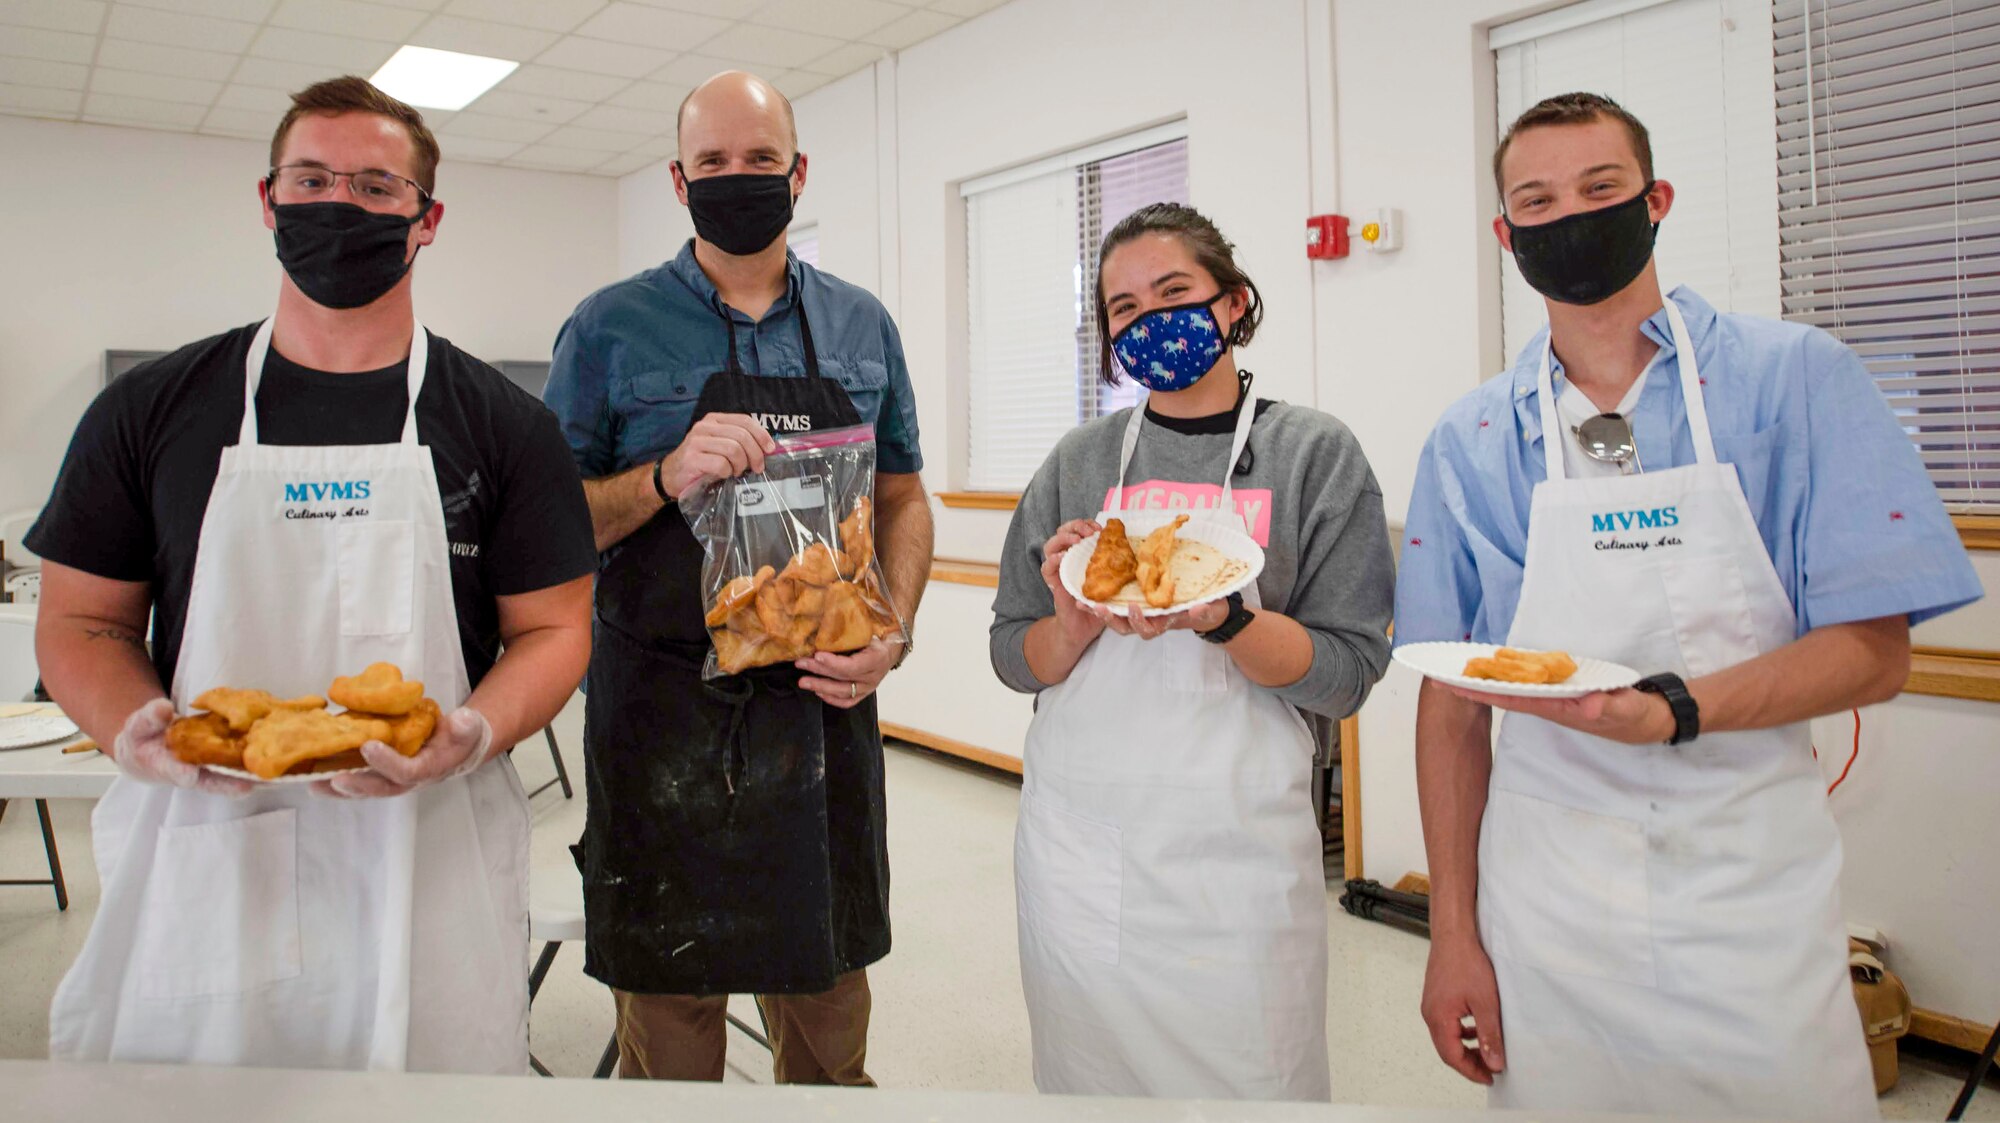 (From left to right) Airman 1st Class Hunter Breaux, 16th Training Squadron student, Col. Ryan Keeney, 49th Wing commander, Airman 1st Class Bianca Jones, 16th TRS student, and Airman 1st Class Brayden Scott, 16th TRS student, show off their homemade tortillas and sopapillas during a cooking class Nov. 7, 2020, on Holloman Air Force Base, New Mexico. The cooking class was available to Airmen and their families as part of an initiative to connect them with the culture and activities that Alamogordo has to offer.  (U.S. Air Force photo by Denise Ottaviano.)